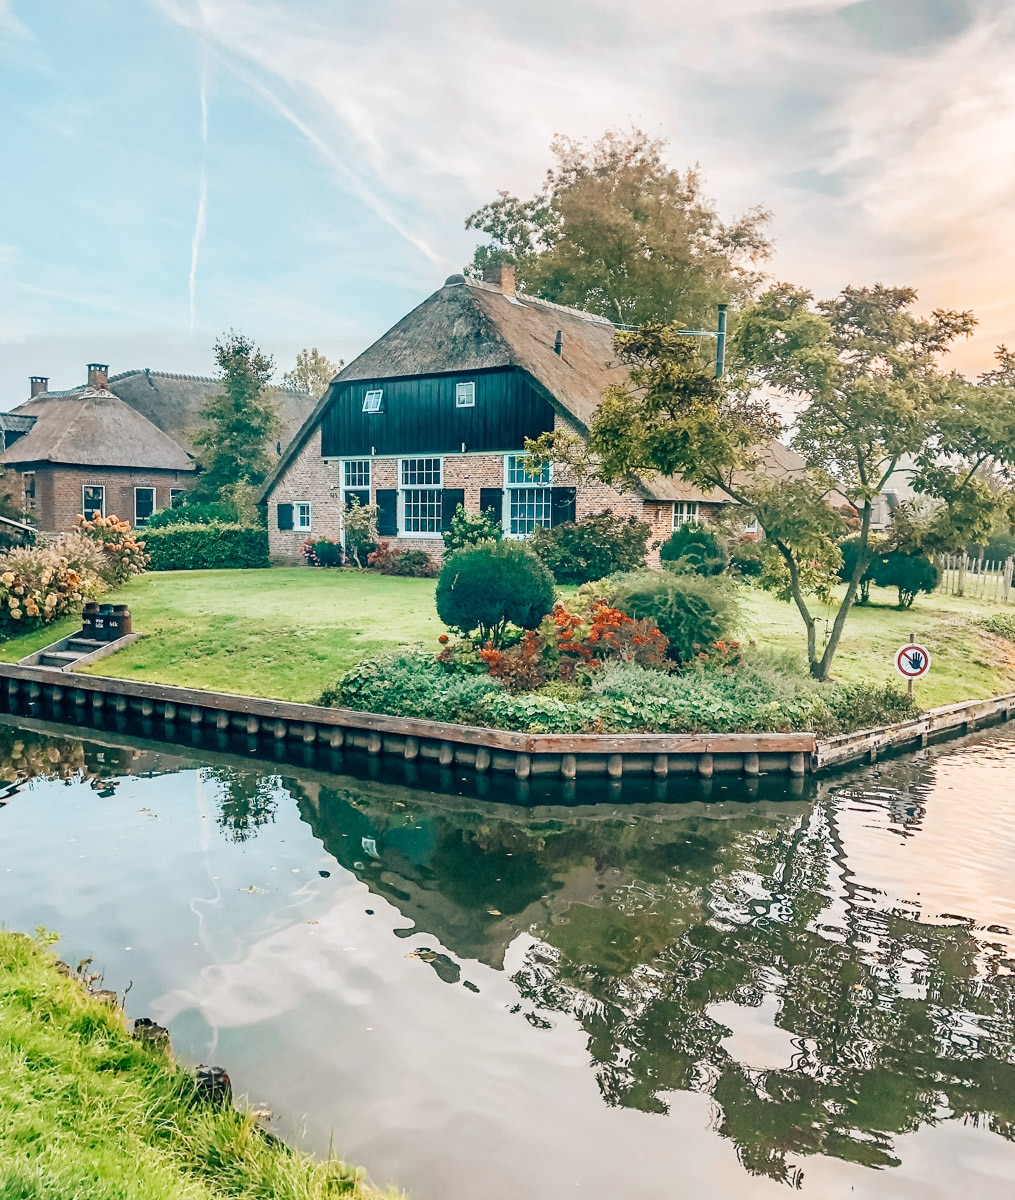 Tips For Visiting Giethoorn: The Dutch Village Without RoadsGiethoorn-1-2